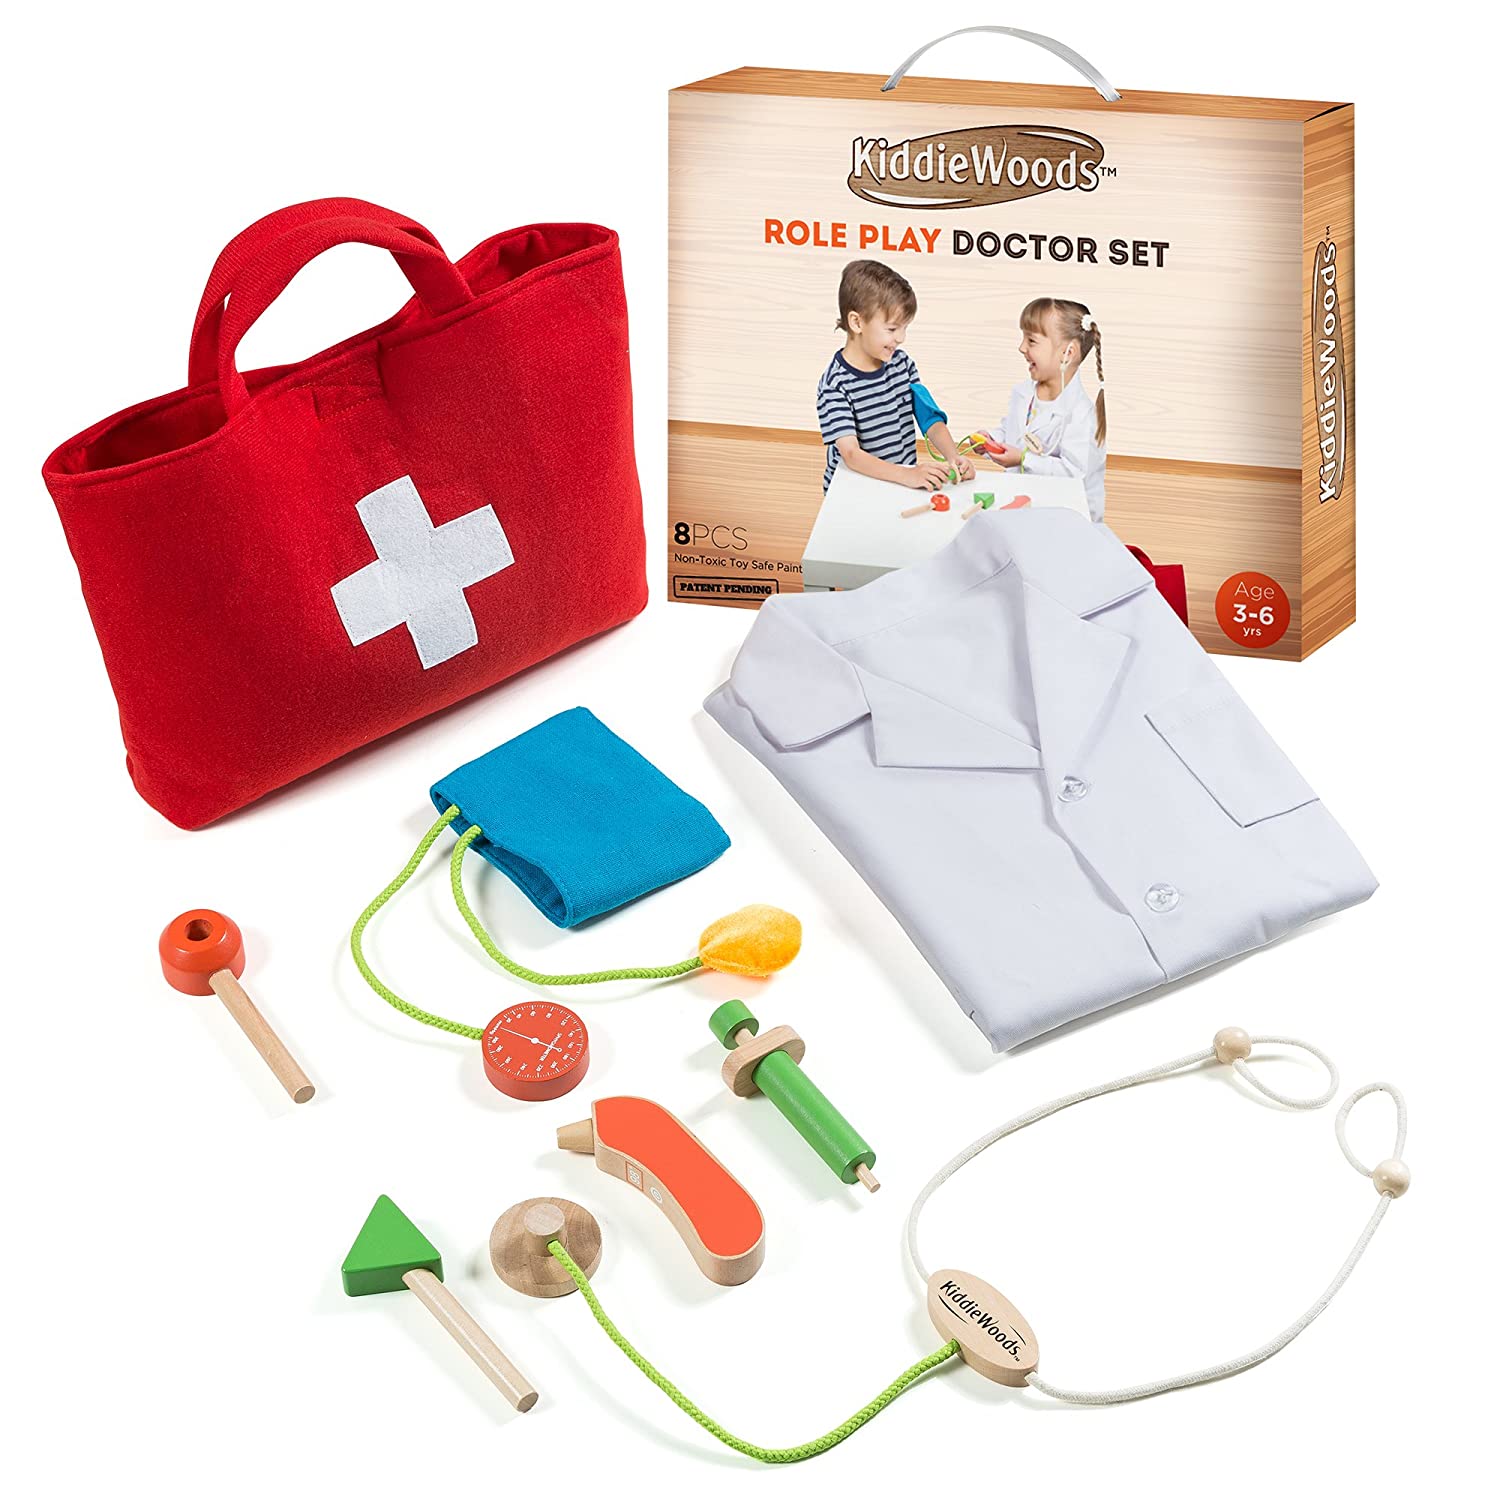 Top 9 Best Toy Doctor Kits Reviews in 2022 9